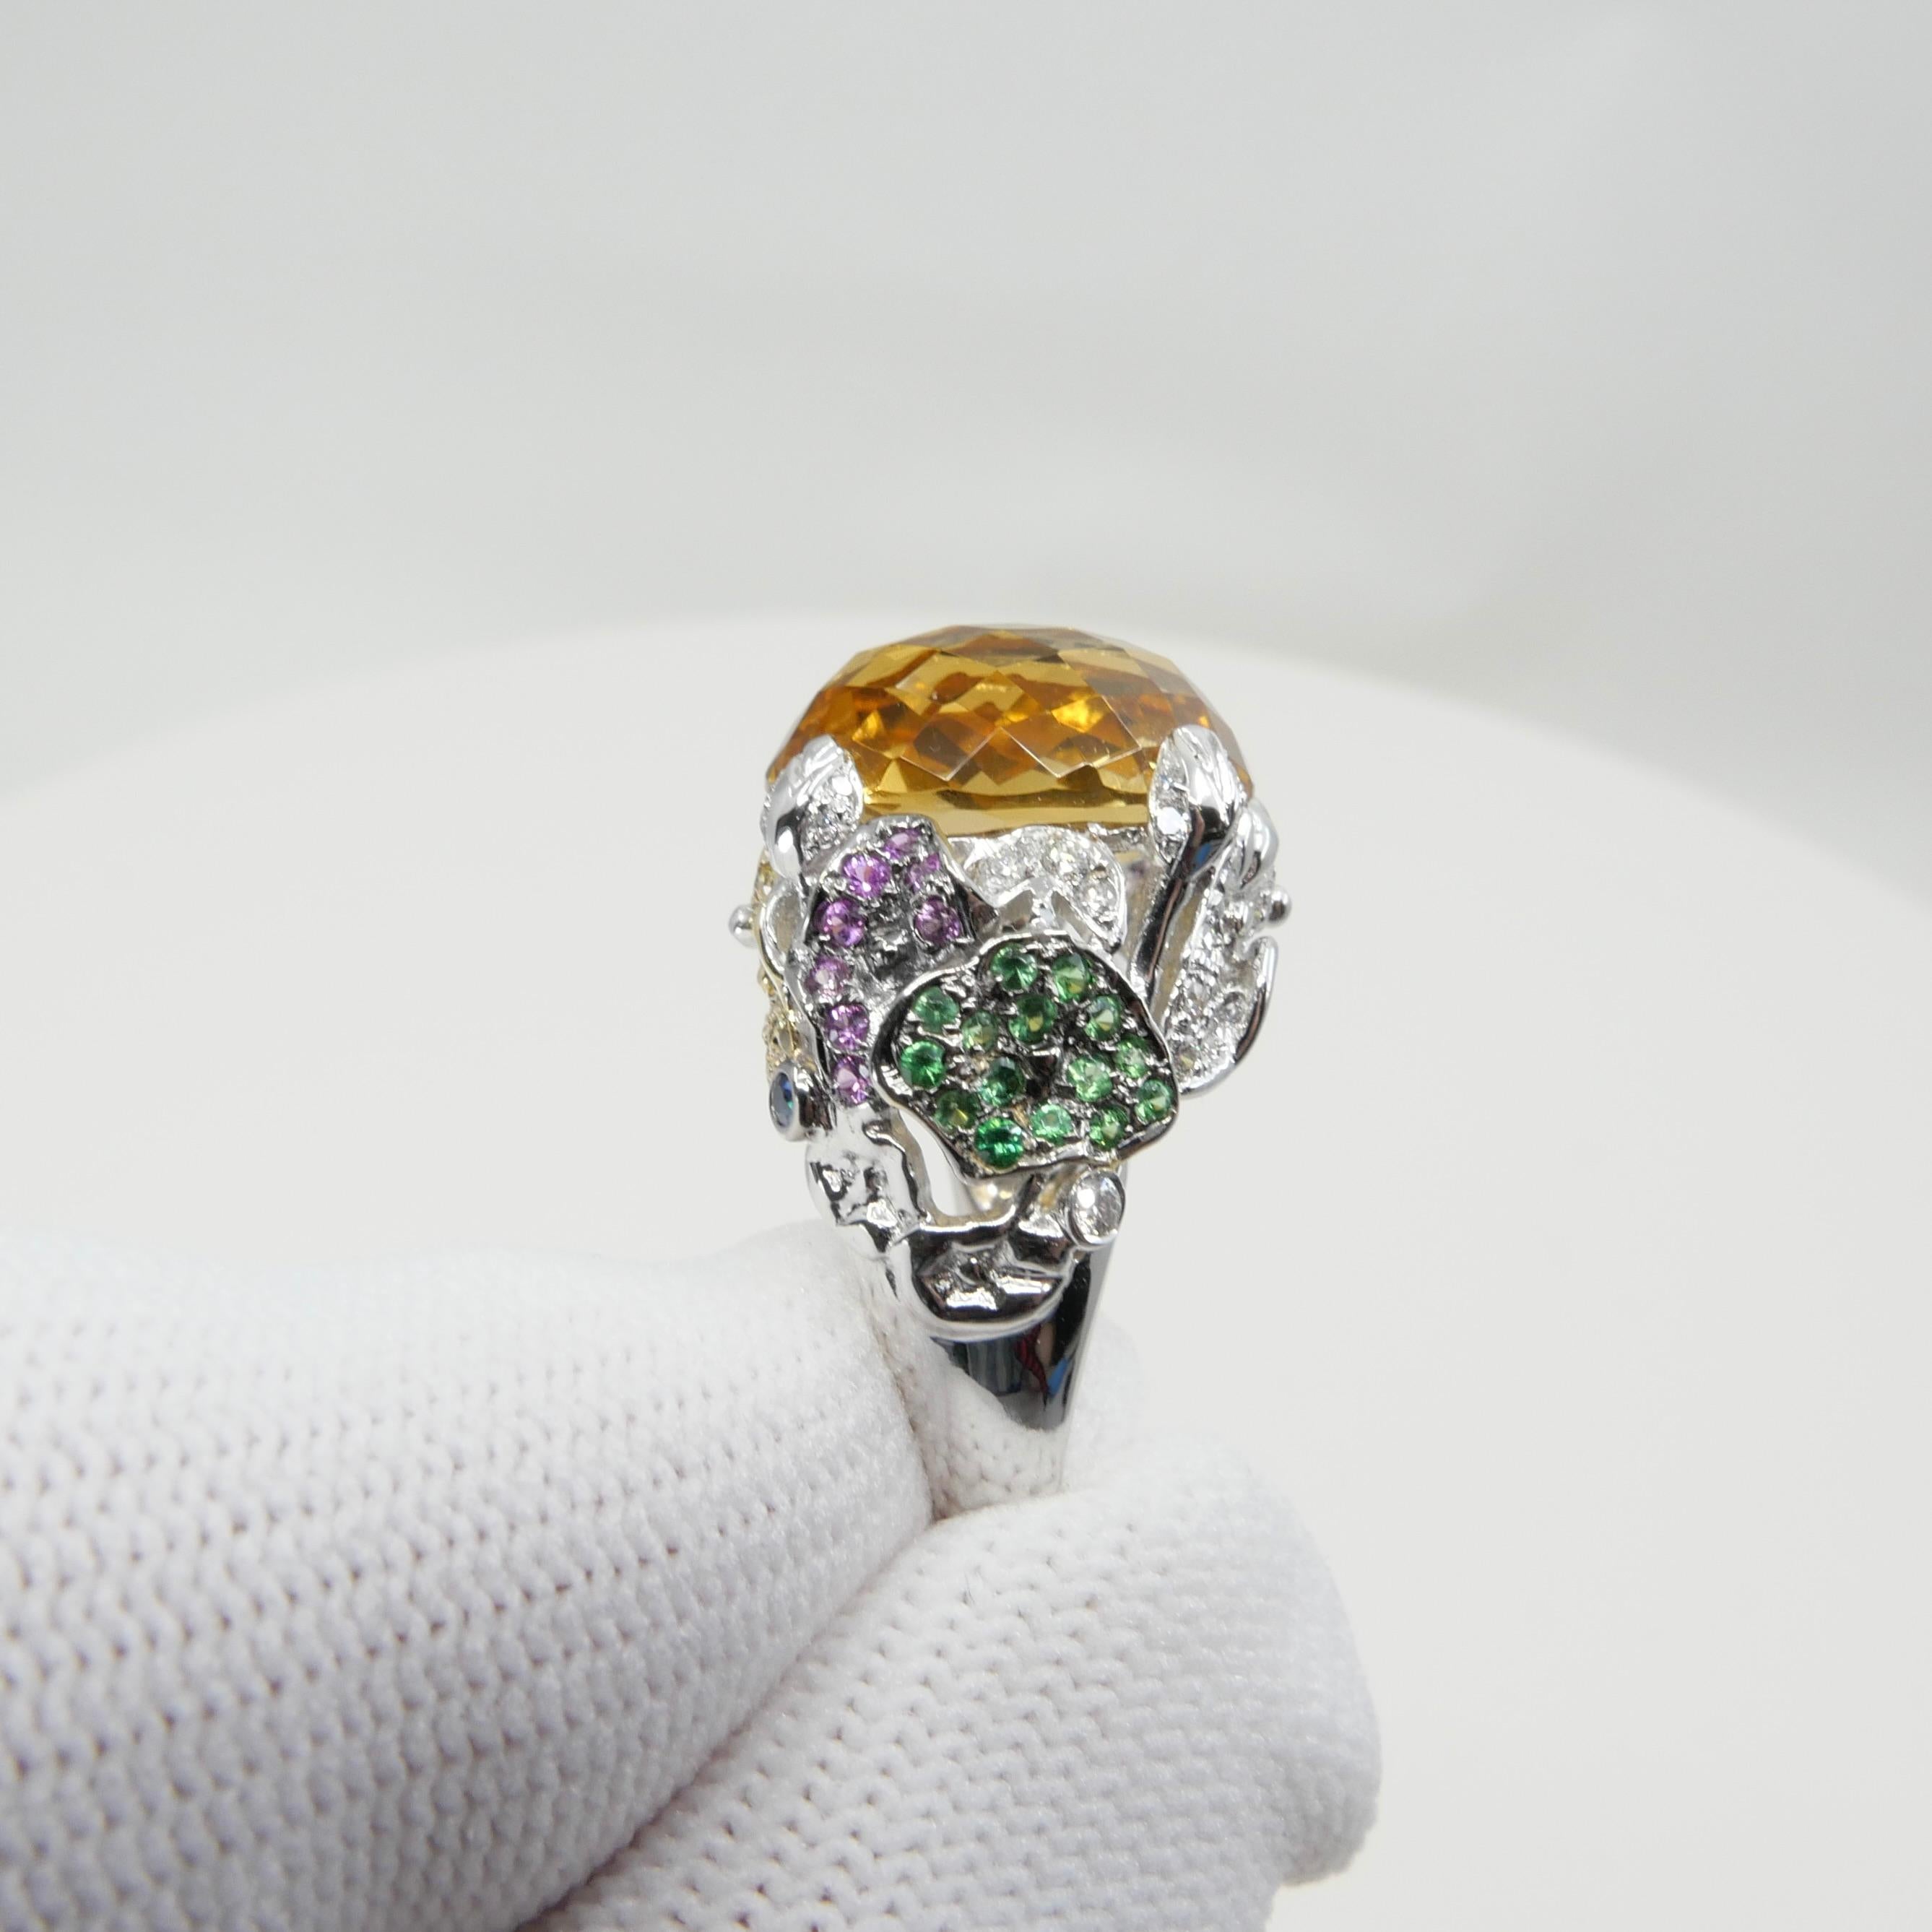 Checker Cut Yellow Topaz, Diamond & Colored Gemstones Cocktail Ring, Colorful For Sale 4